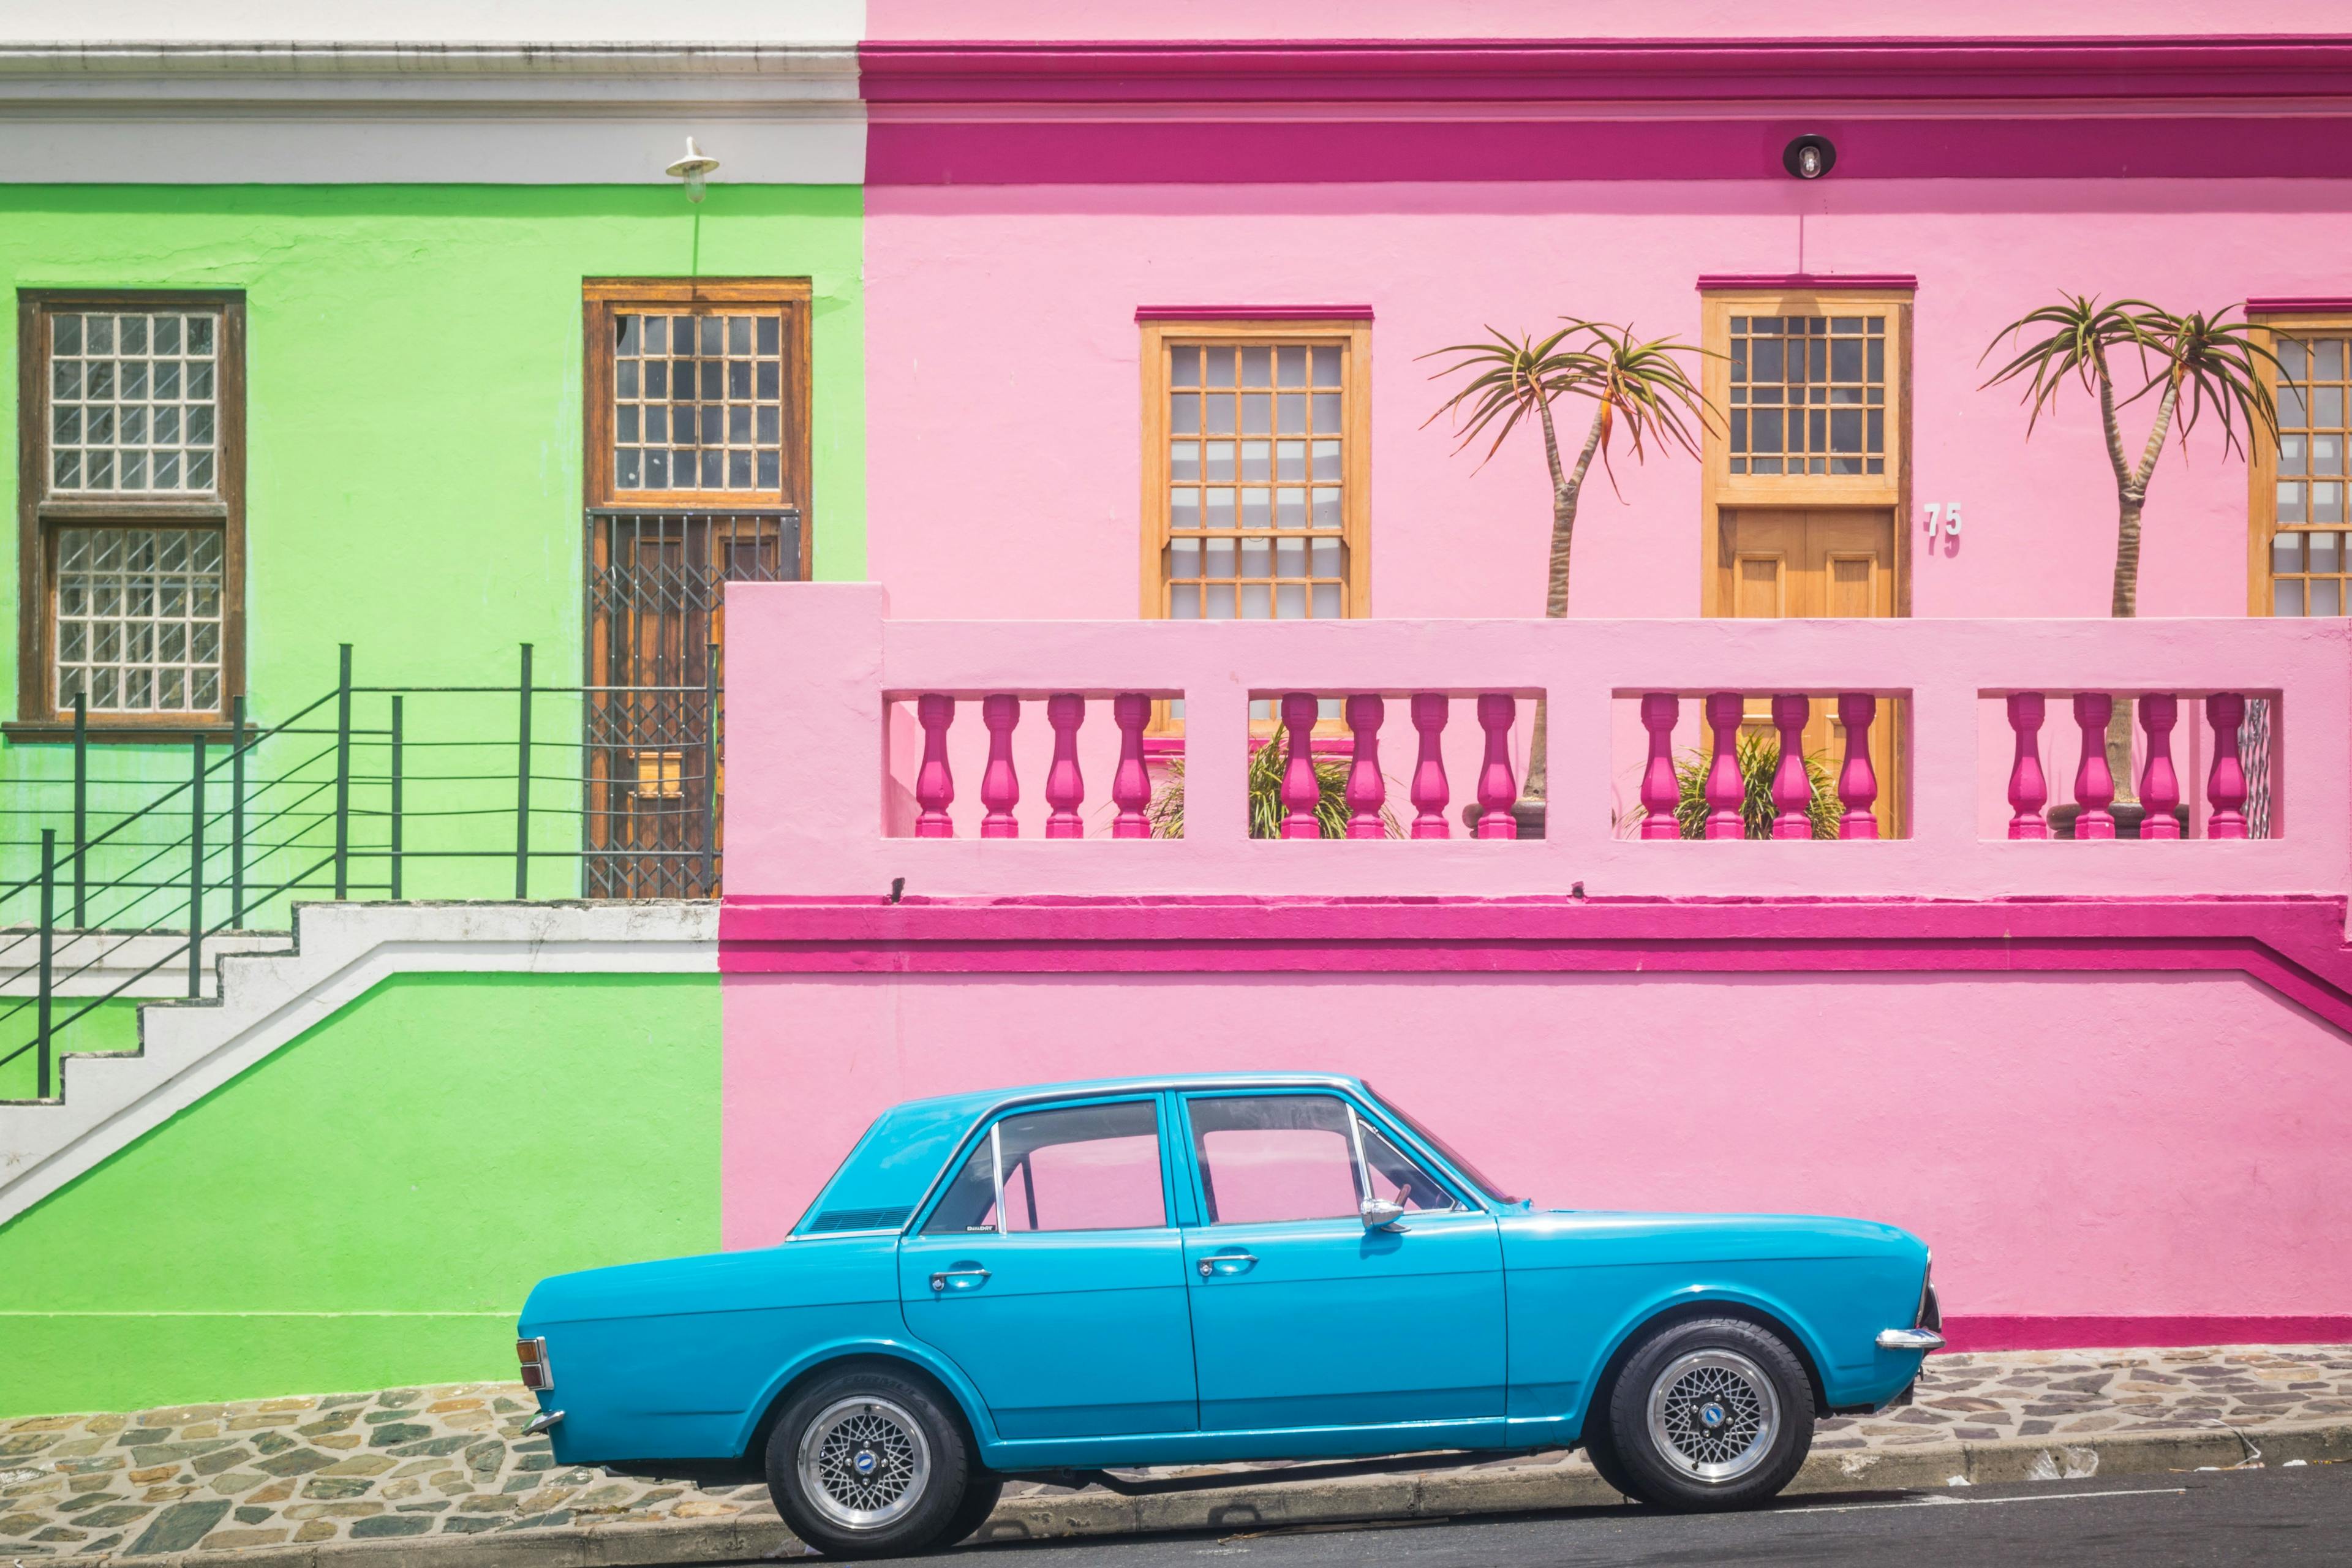 Car parking in Bo-Kaap, Cape Town, South Africa